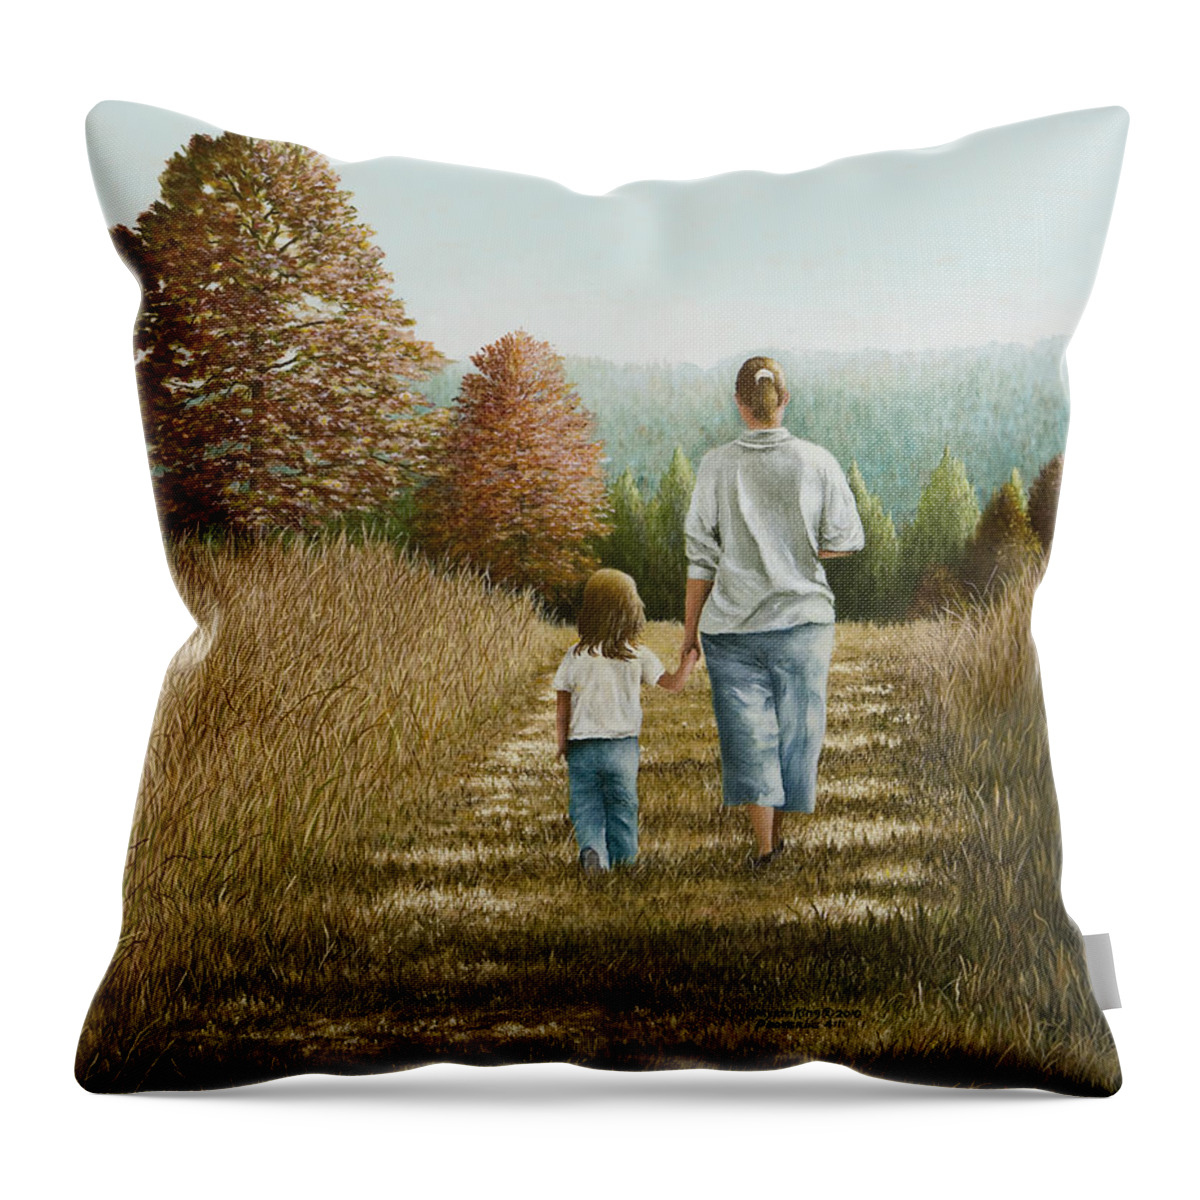 Landscape Paintings Throw Pillow featuring the painting Going Home by Mary Ann King